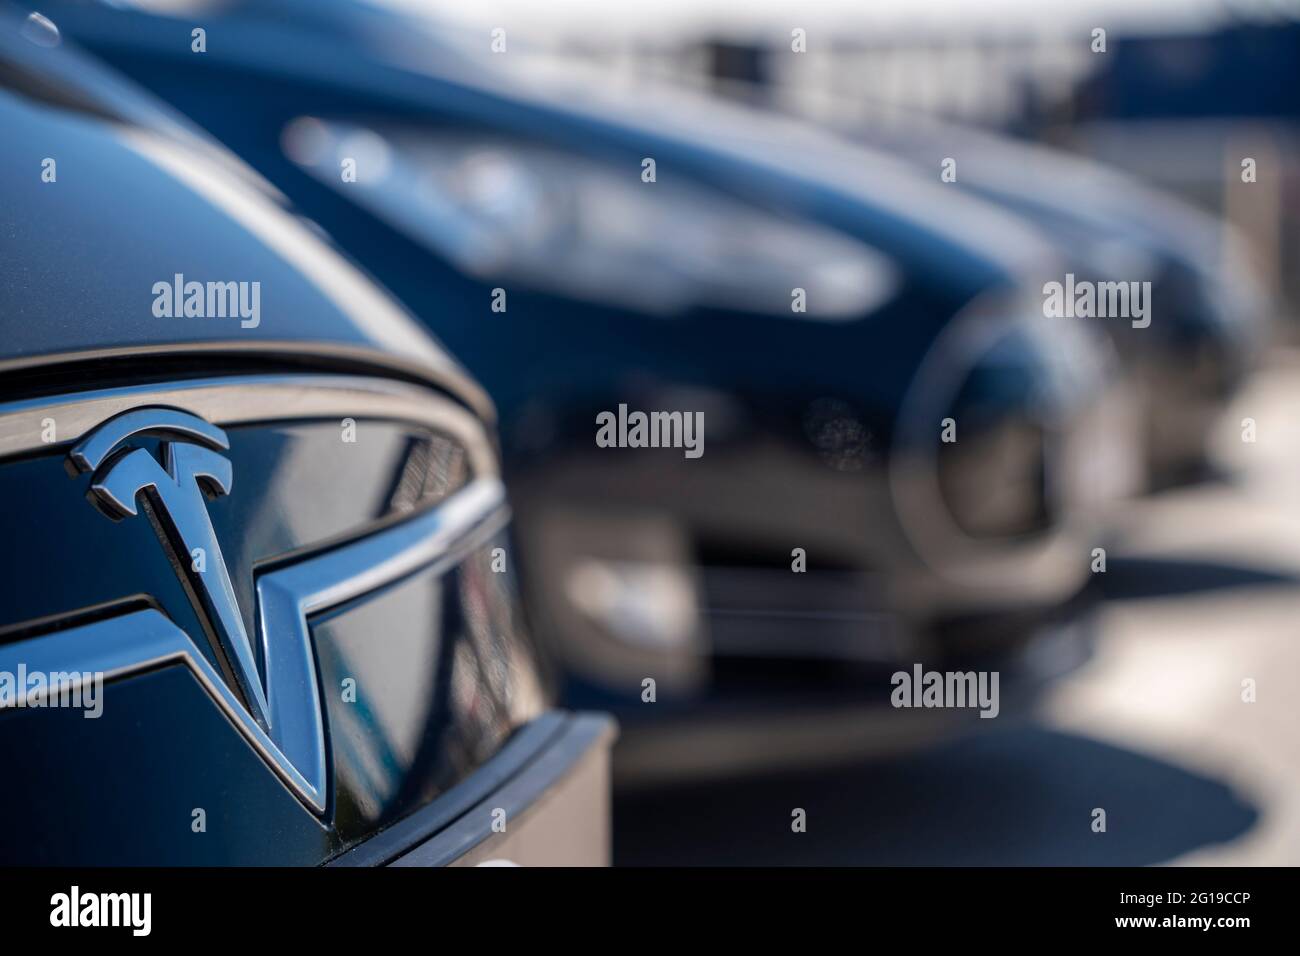 Tesla electric vehicles with badge in foreground Stock Photo